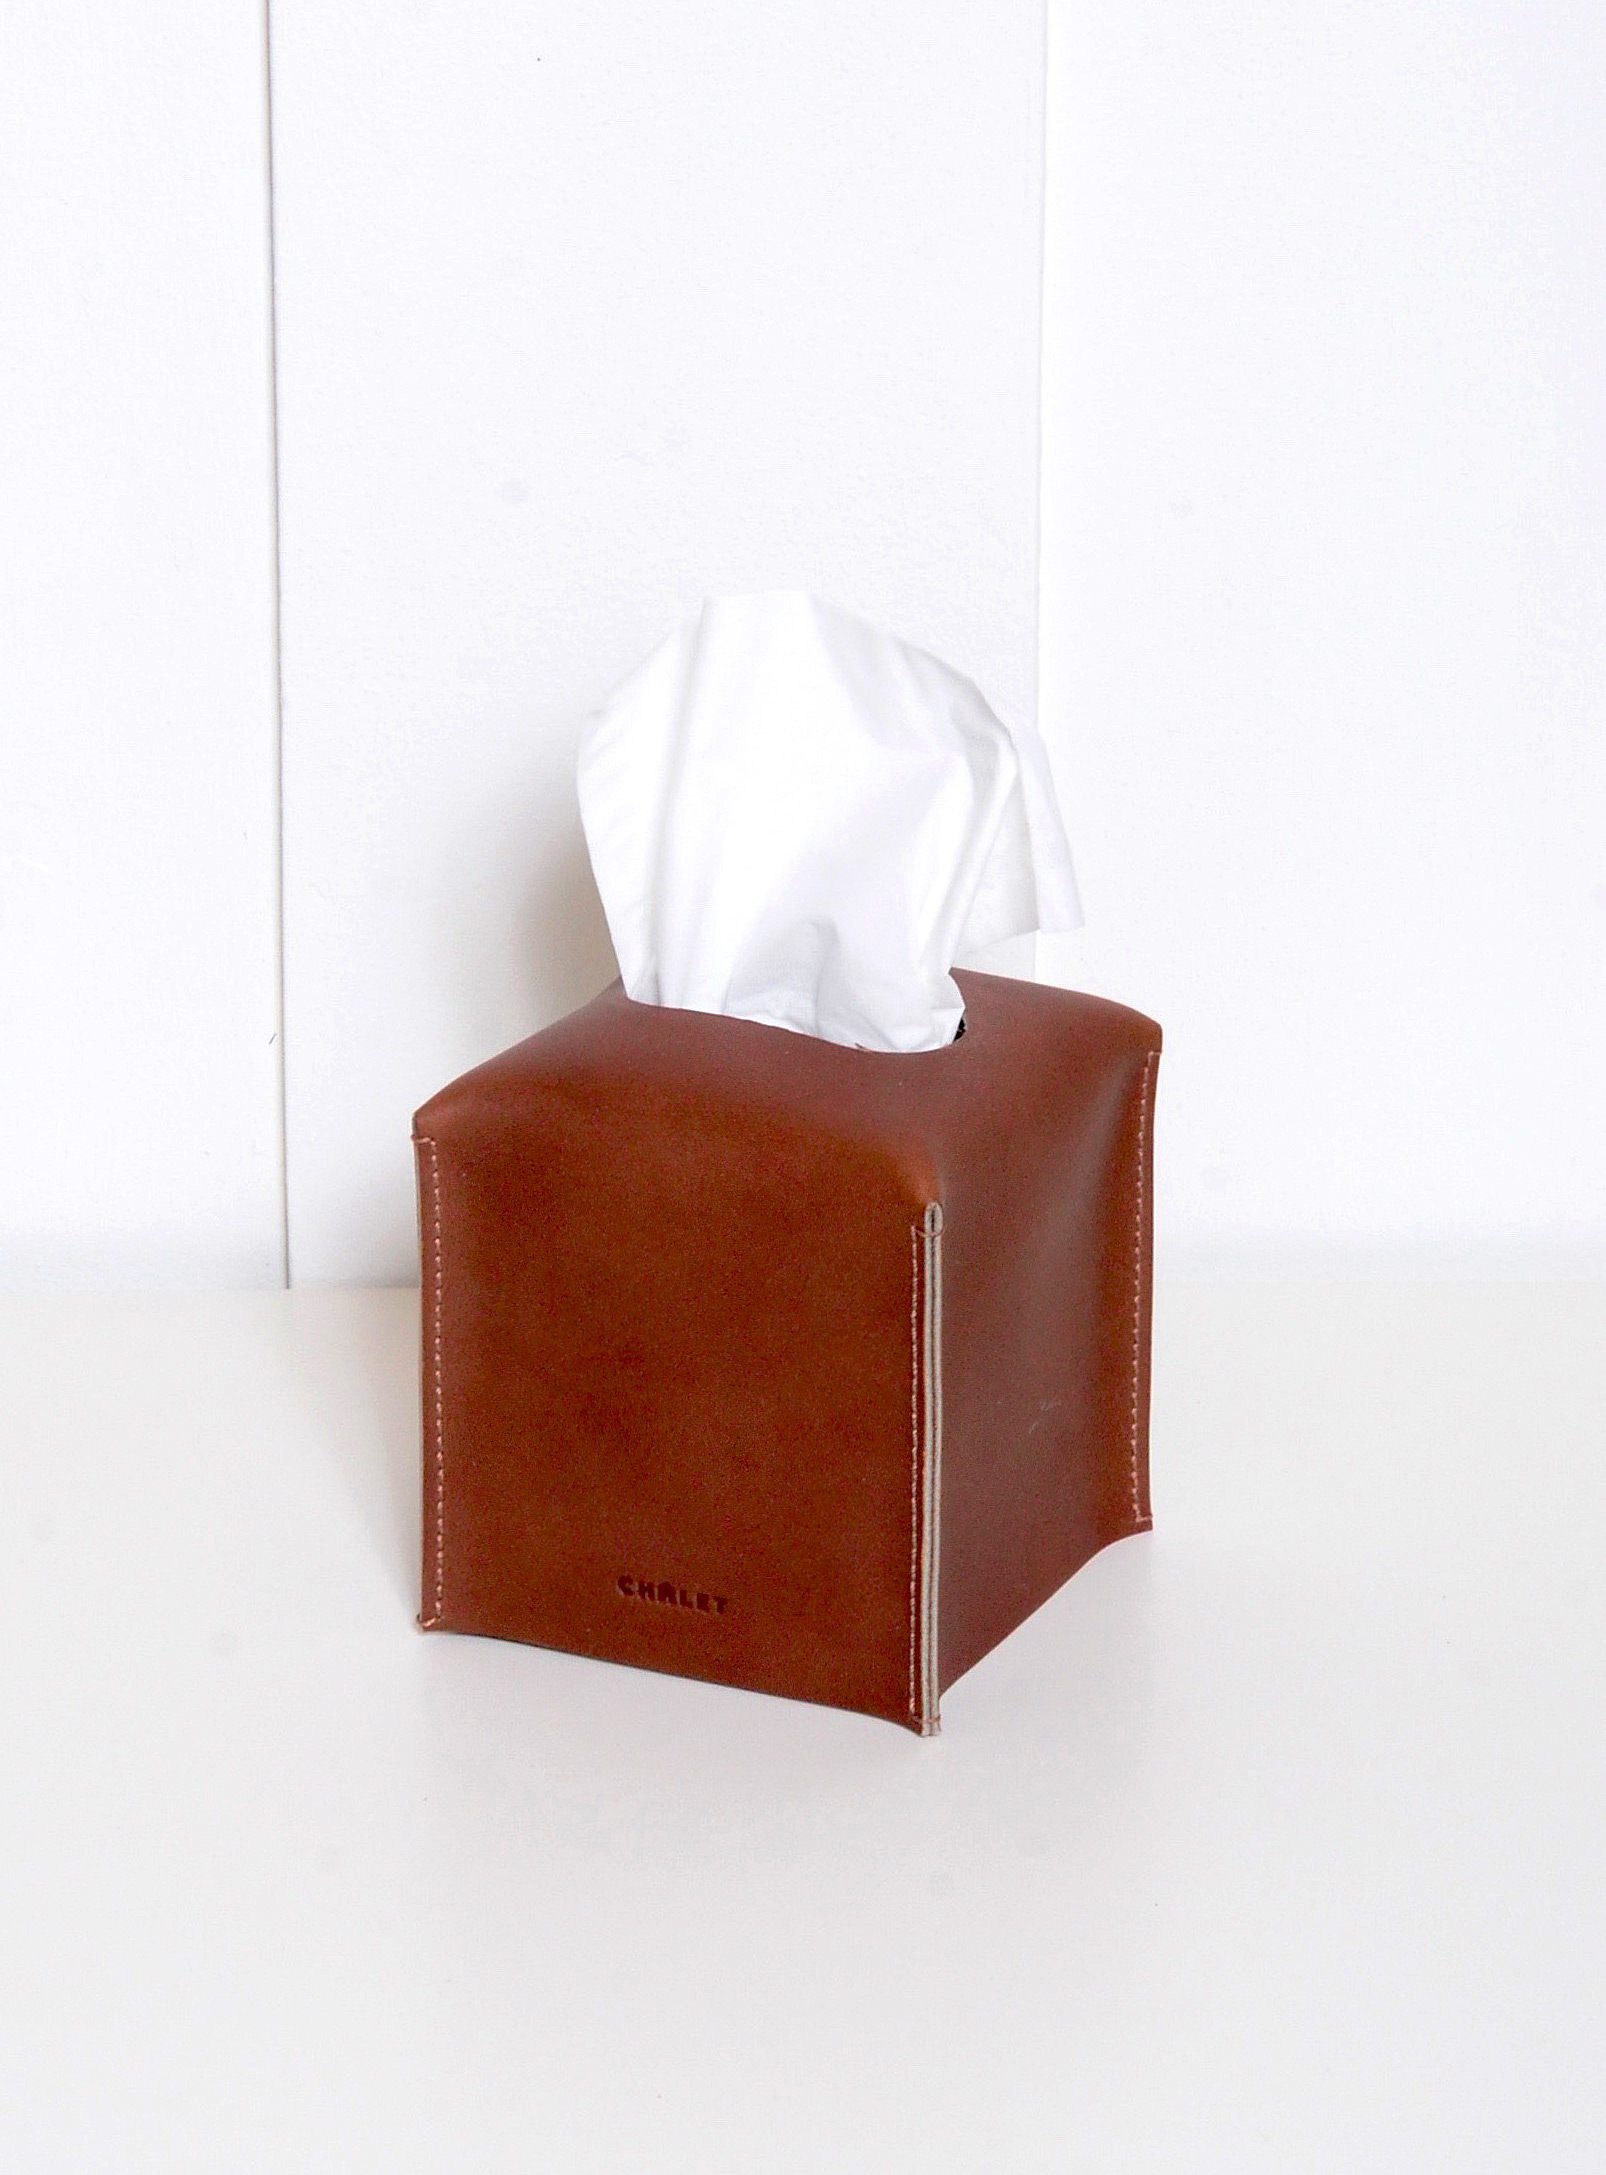 Atelier Chalet Cubic Leather Tissue Box Cover In Brown